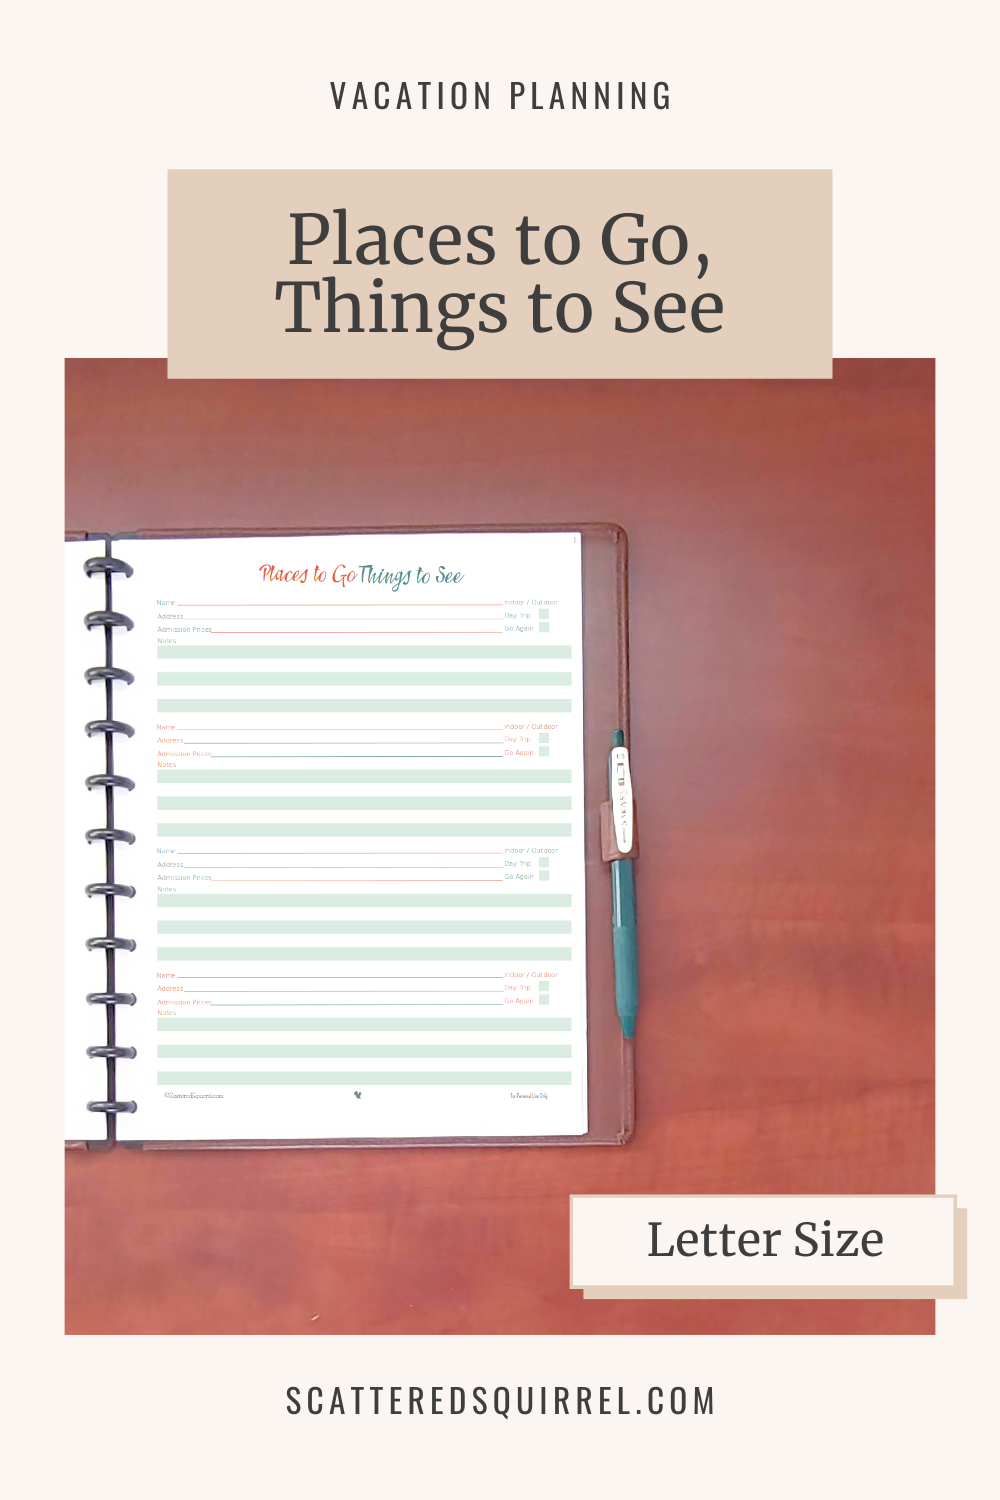 This image links to the letter size, Places to Go Things to See printable PDF.